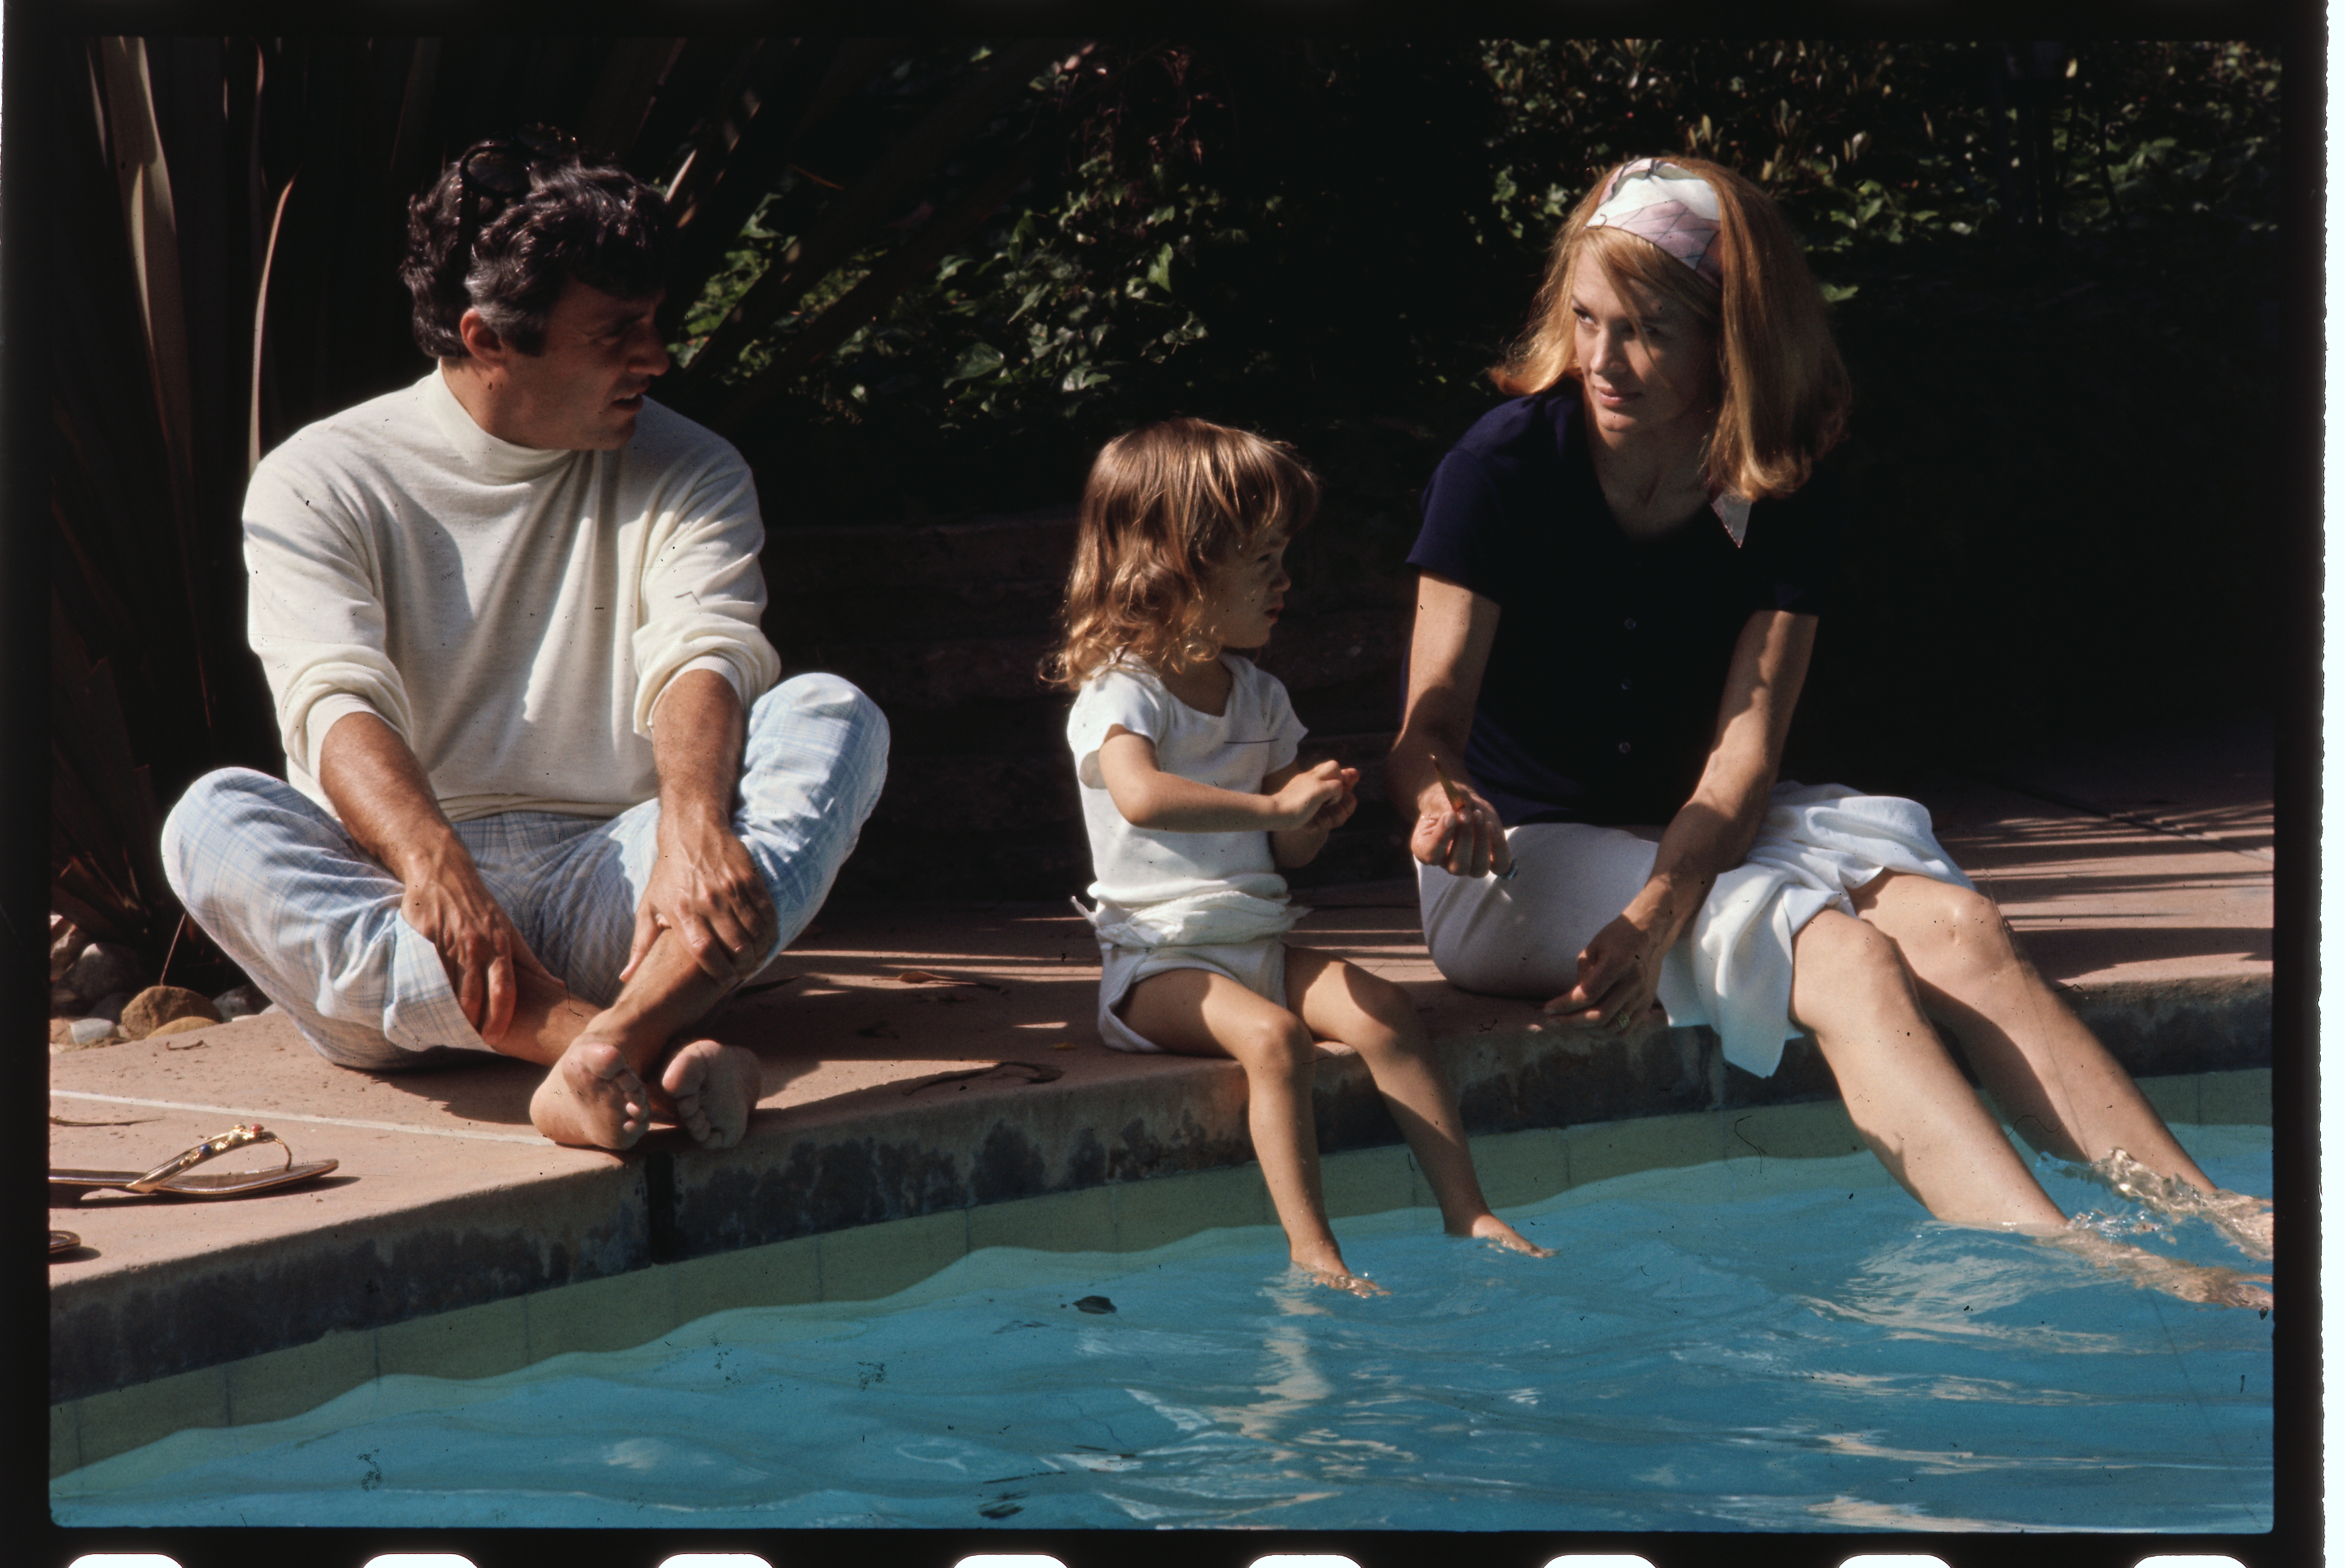 Burt Bacharach, his wife Angie Dickinson, and their 2-year-old daughter Nikki by the swimming pool of their Hollywood home on June 3, 1969 | Source: Getty Images